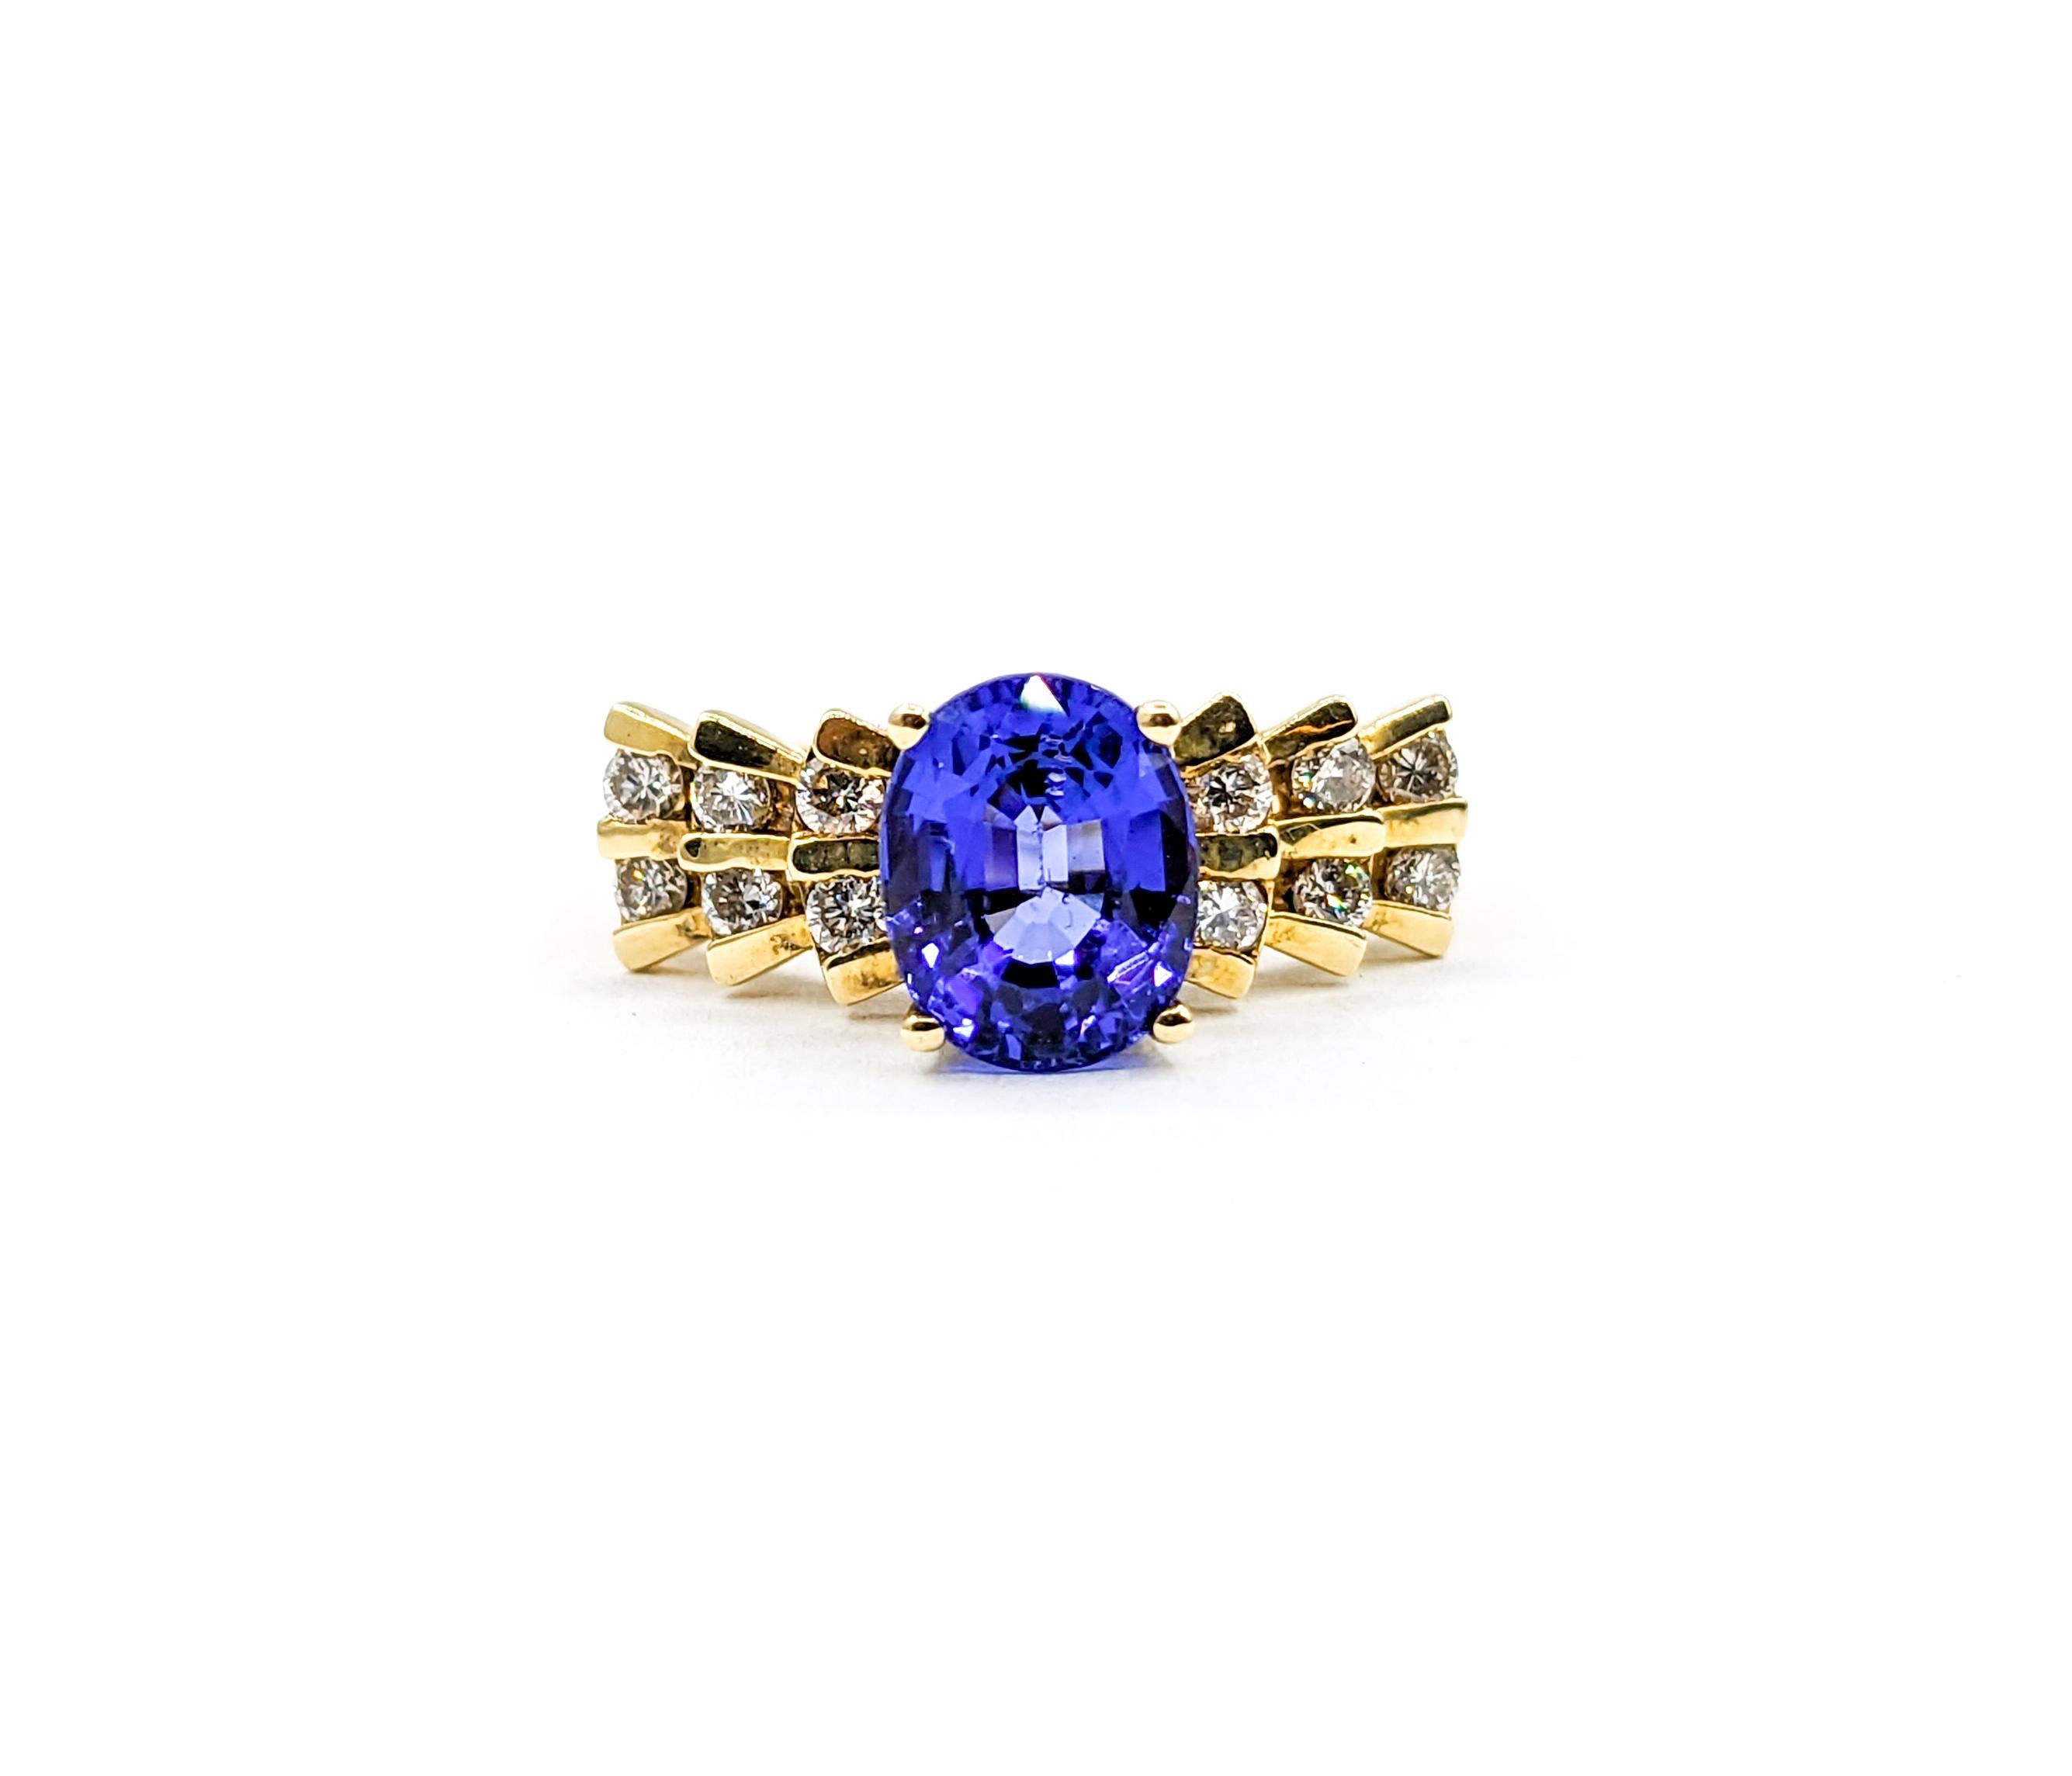 Oval Tanzanite & Diamond Cocktail Ring

Introducing this wonderful Tanzanite ring, beautifully crafted in 14k yellow gold. The center stone is a saturated 1.90ct Tanzanite with a deep blue-purple hue. Decorating the setting are .25ctw round diamonds